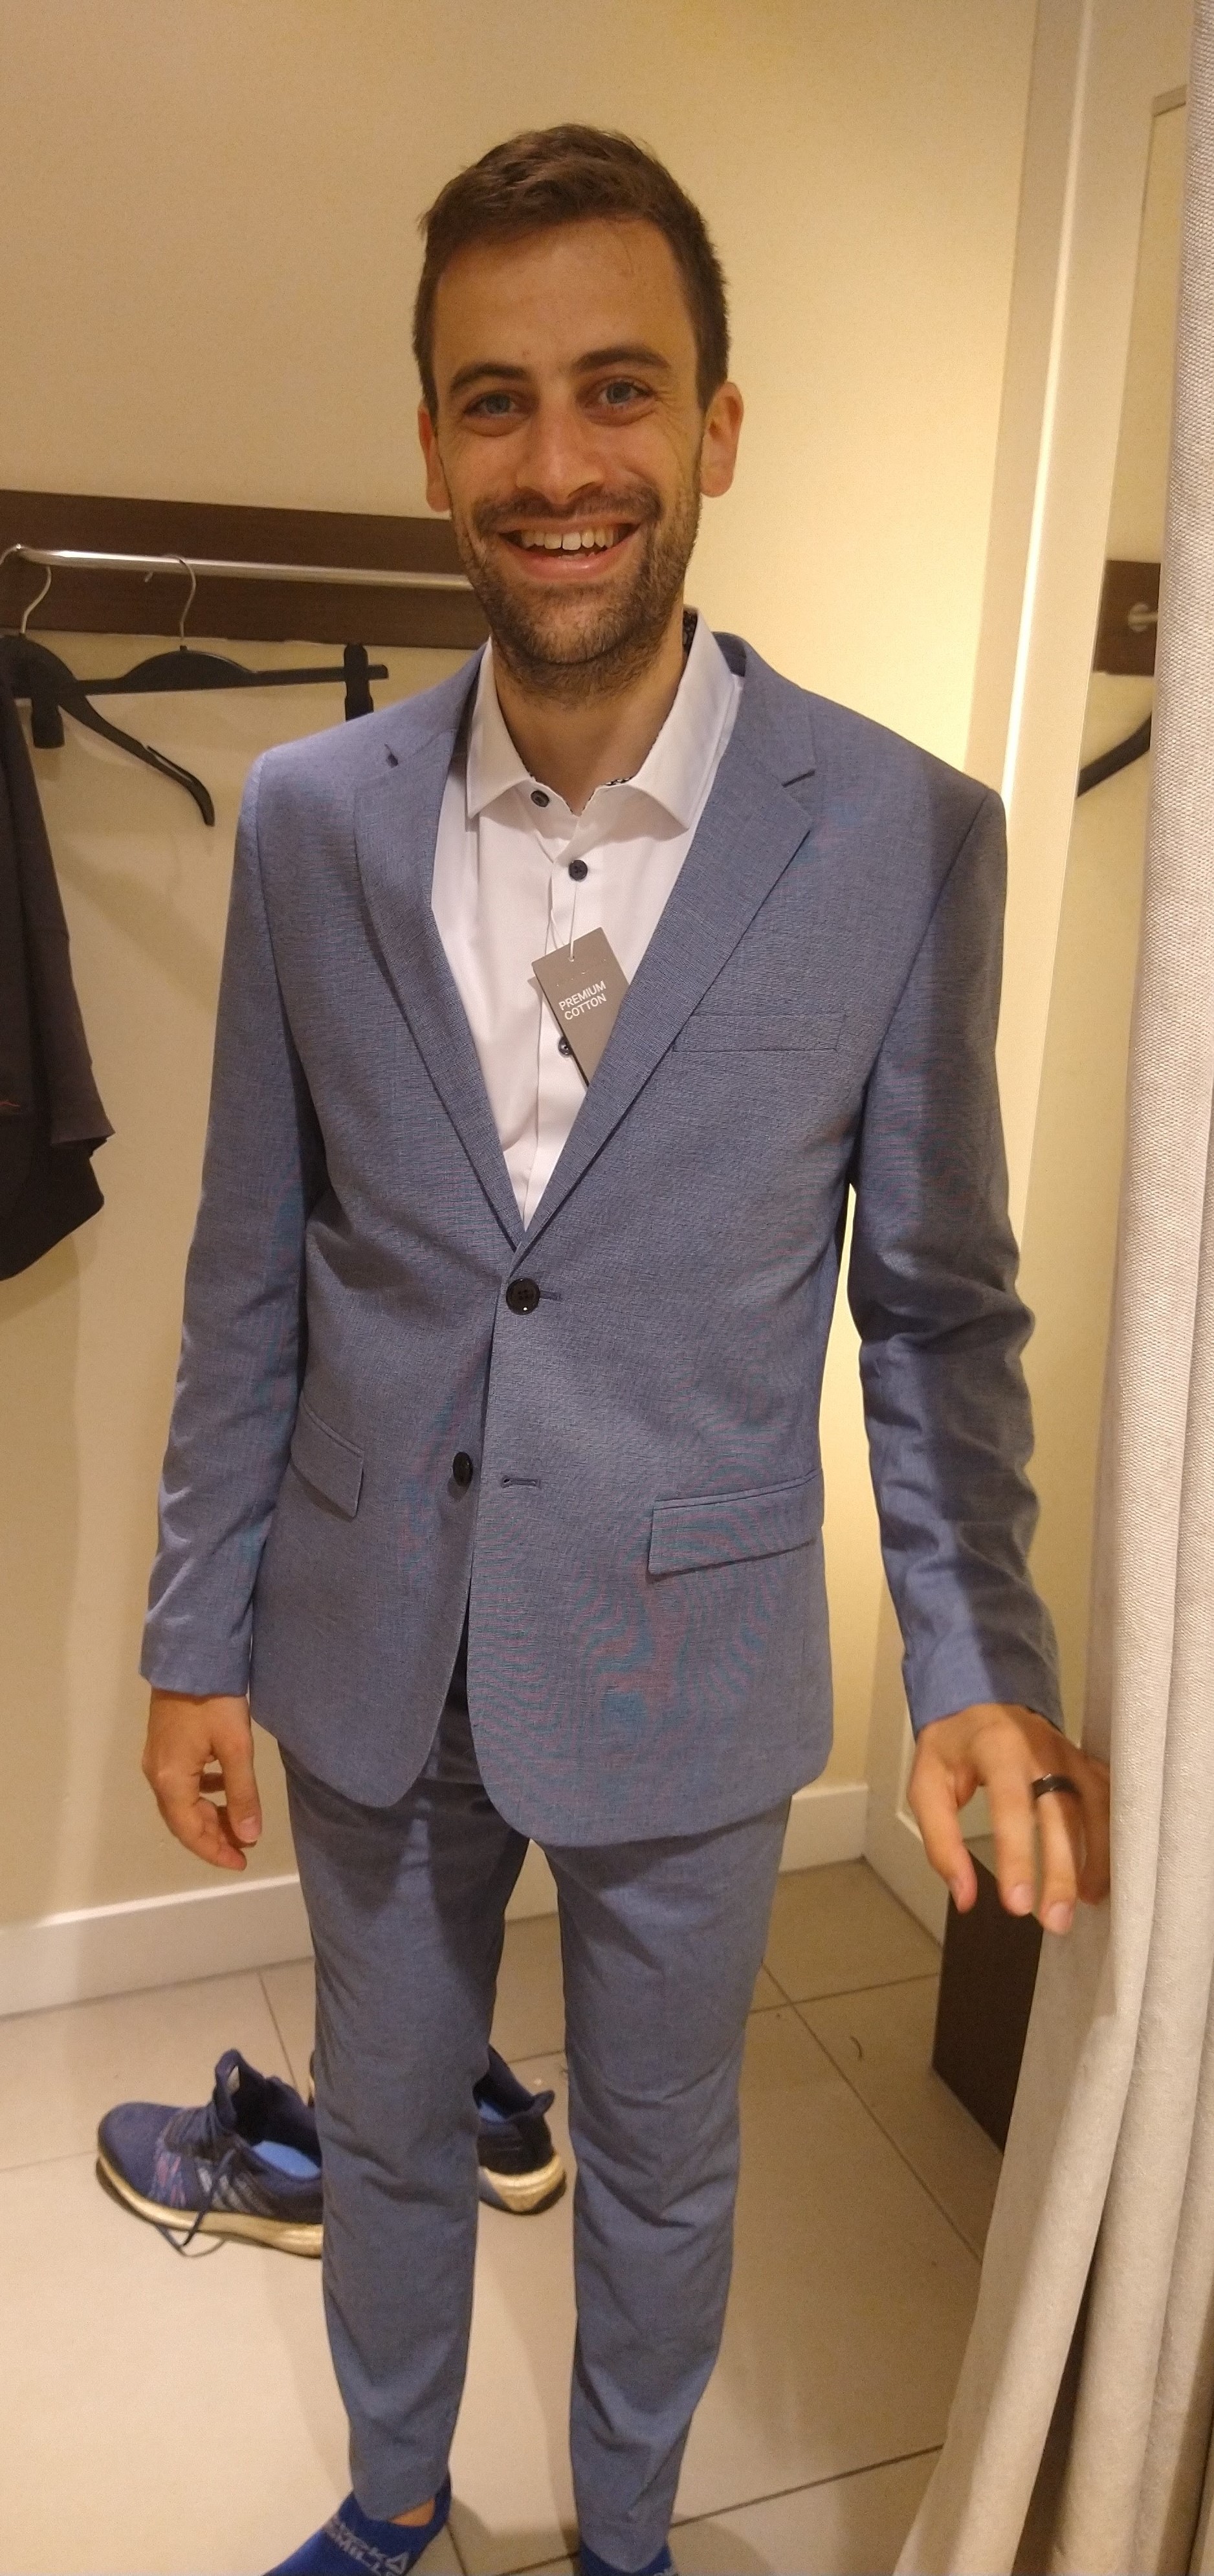 Picture of Joep in fitting room, trying on a suit